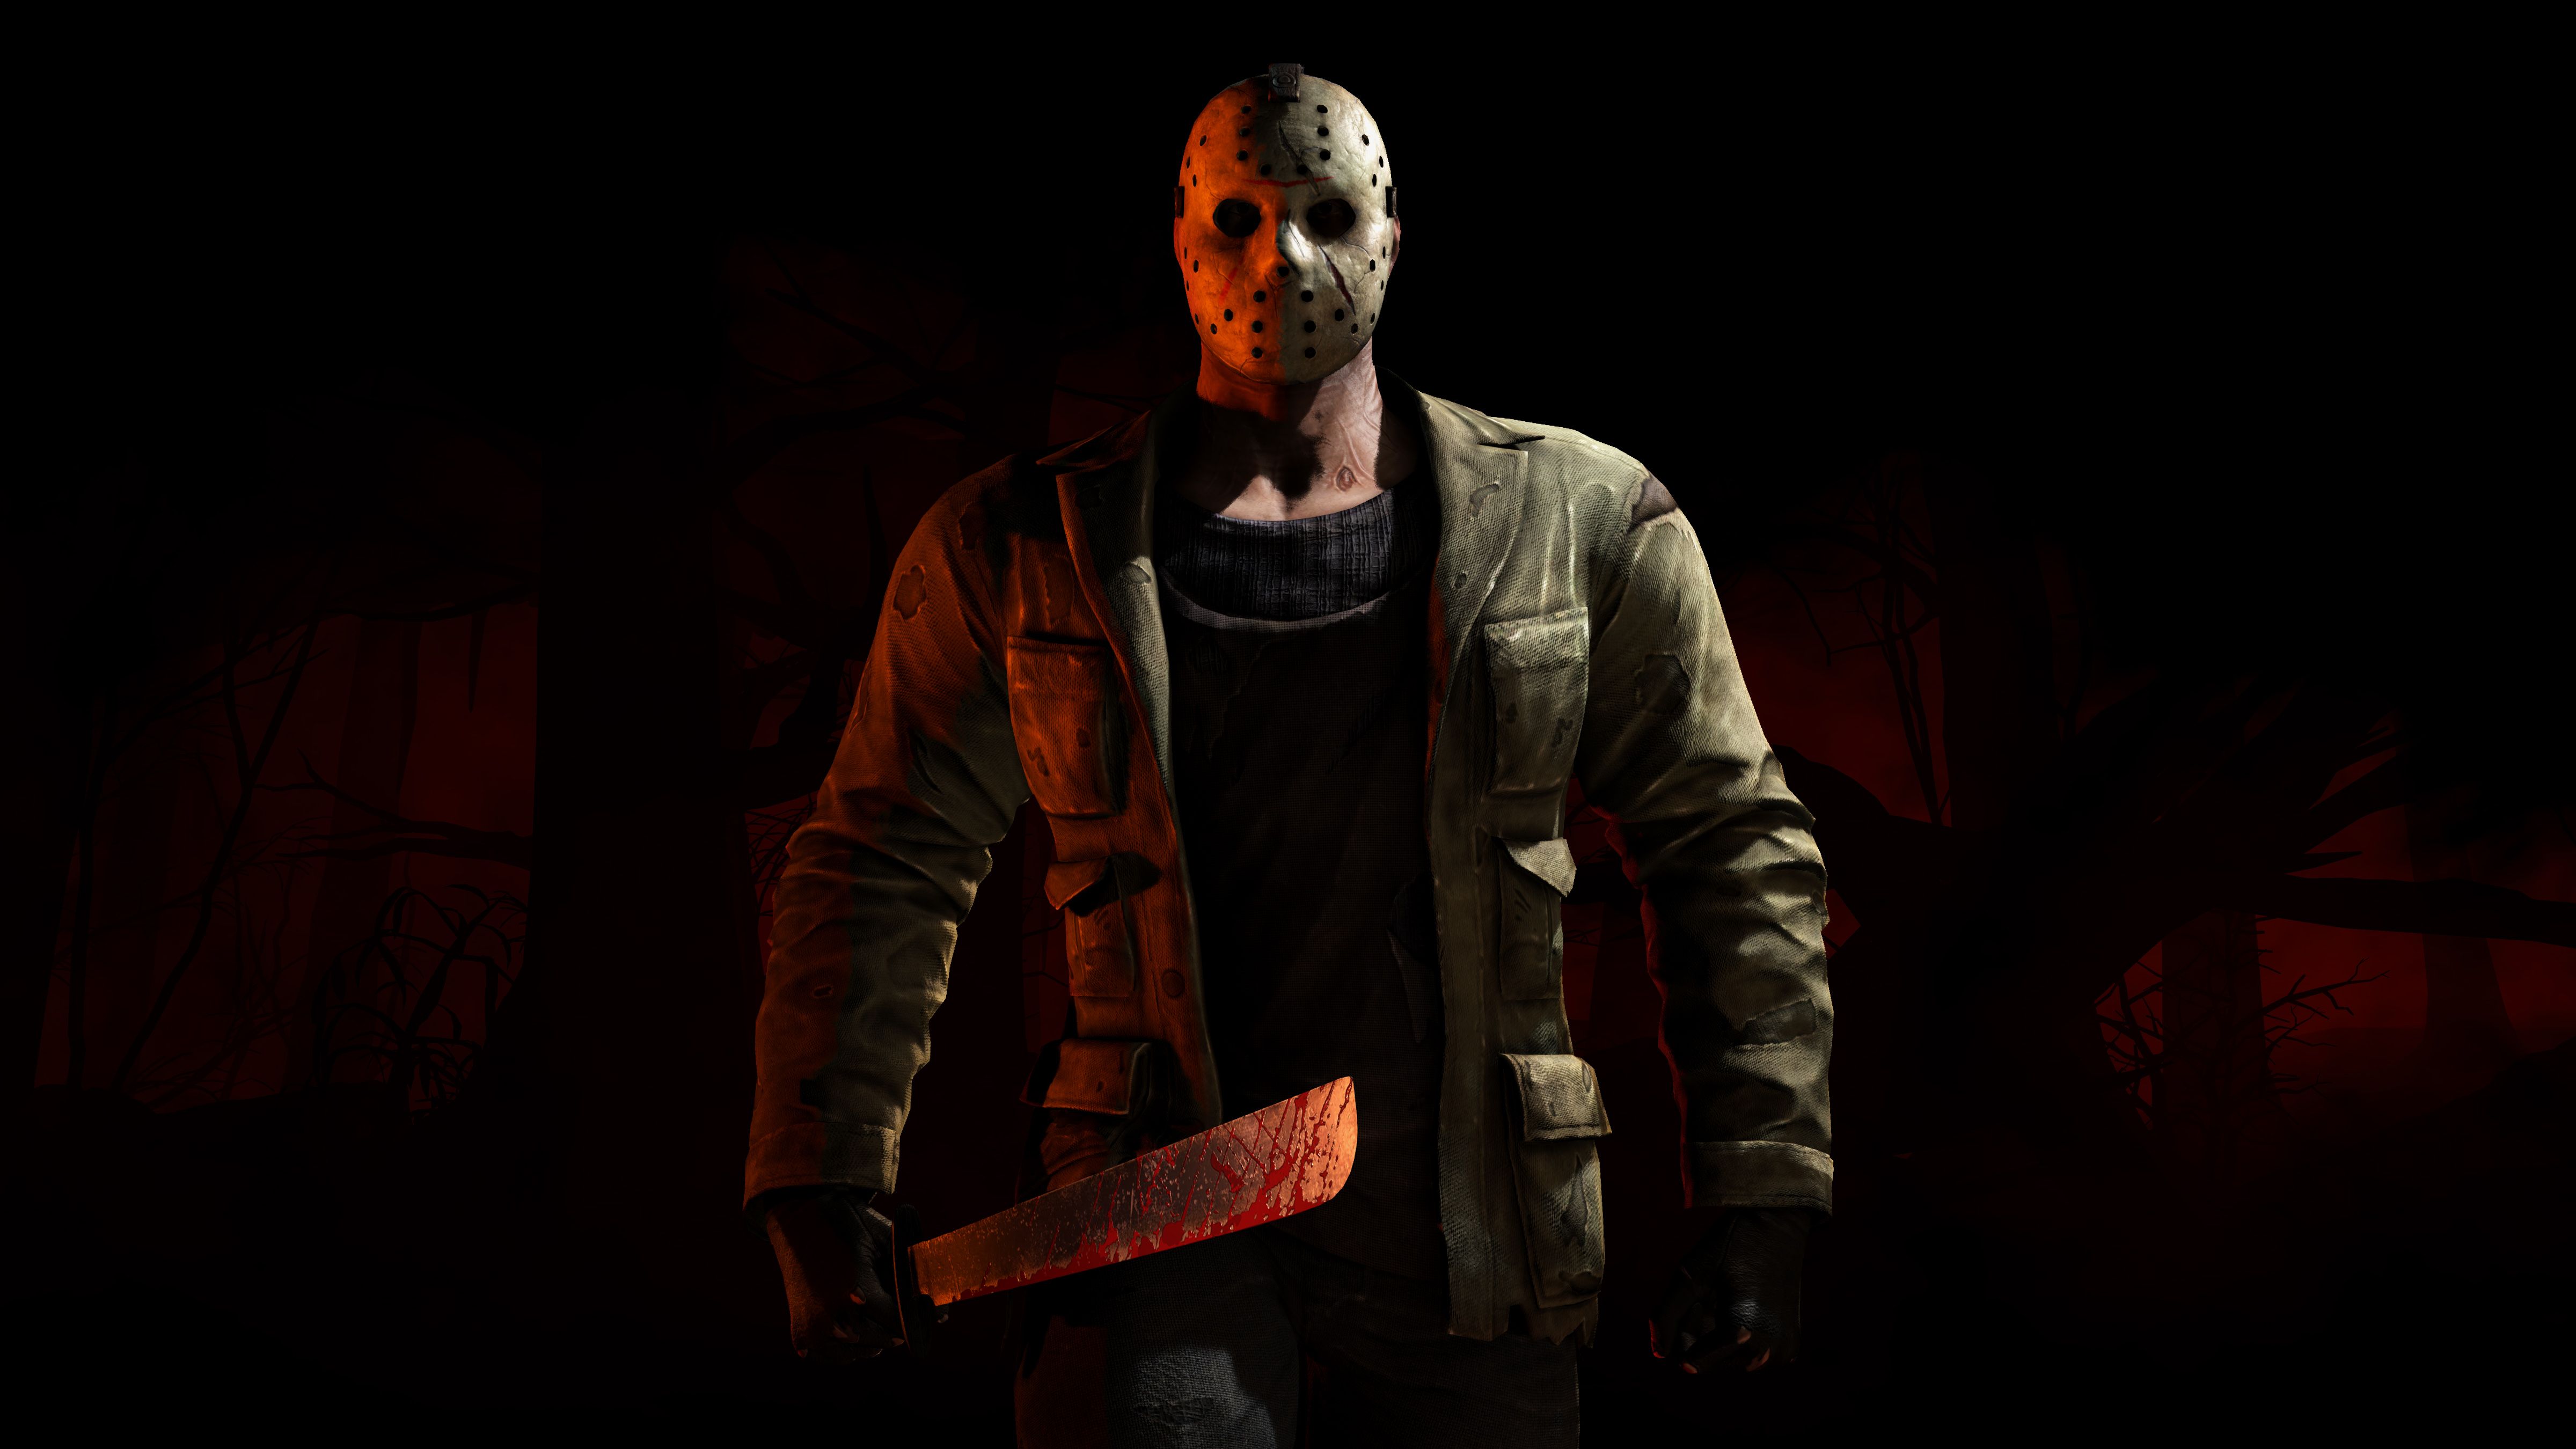 Jason Voorhees is Mortal Kombat X's first guest character